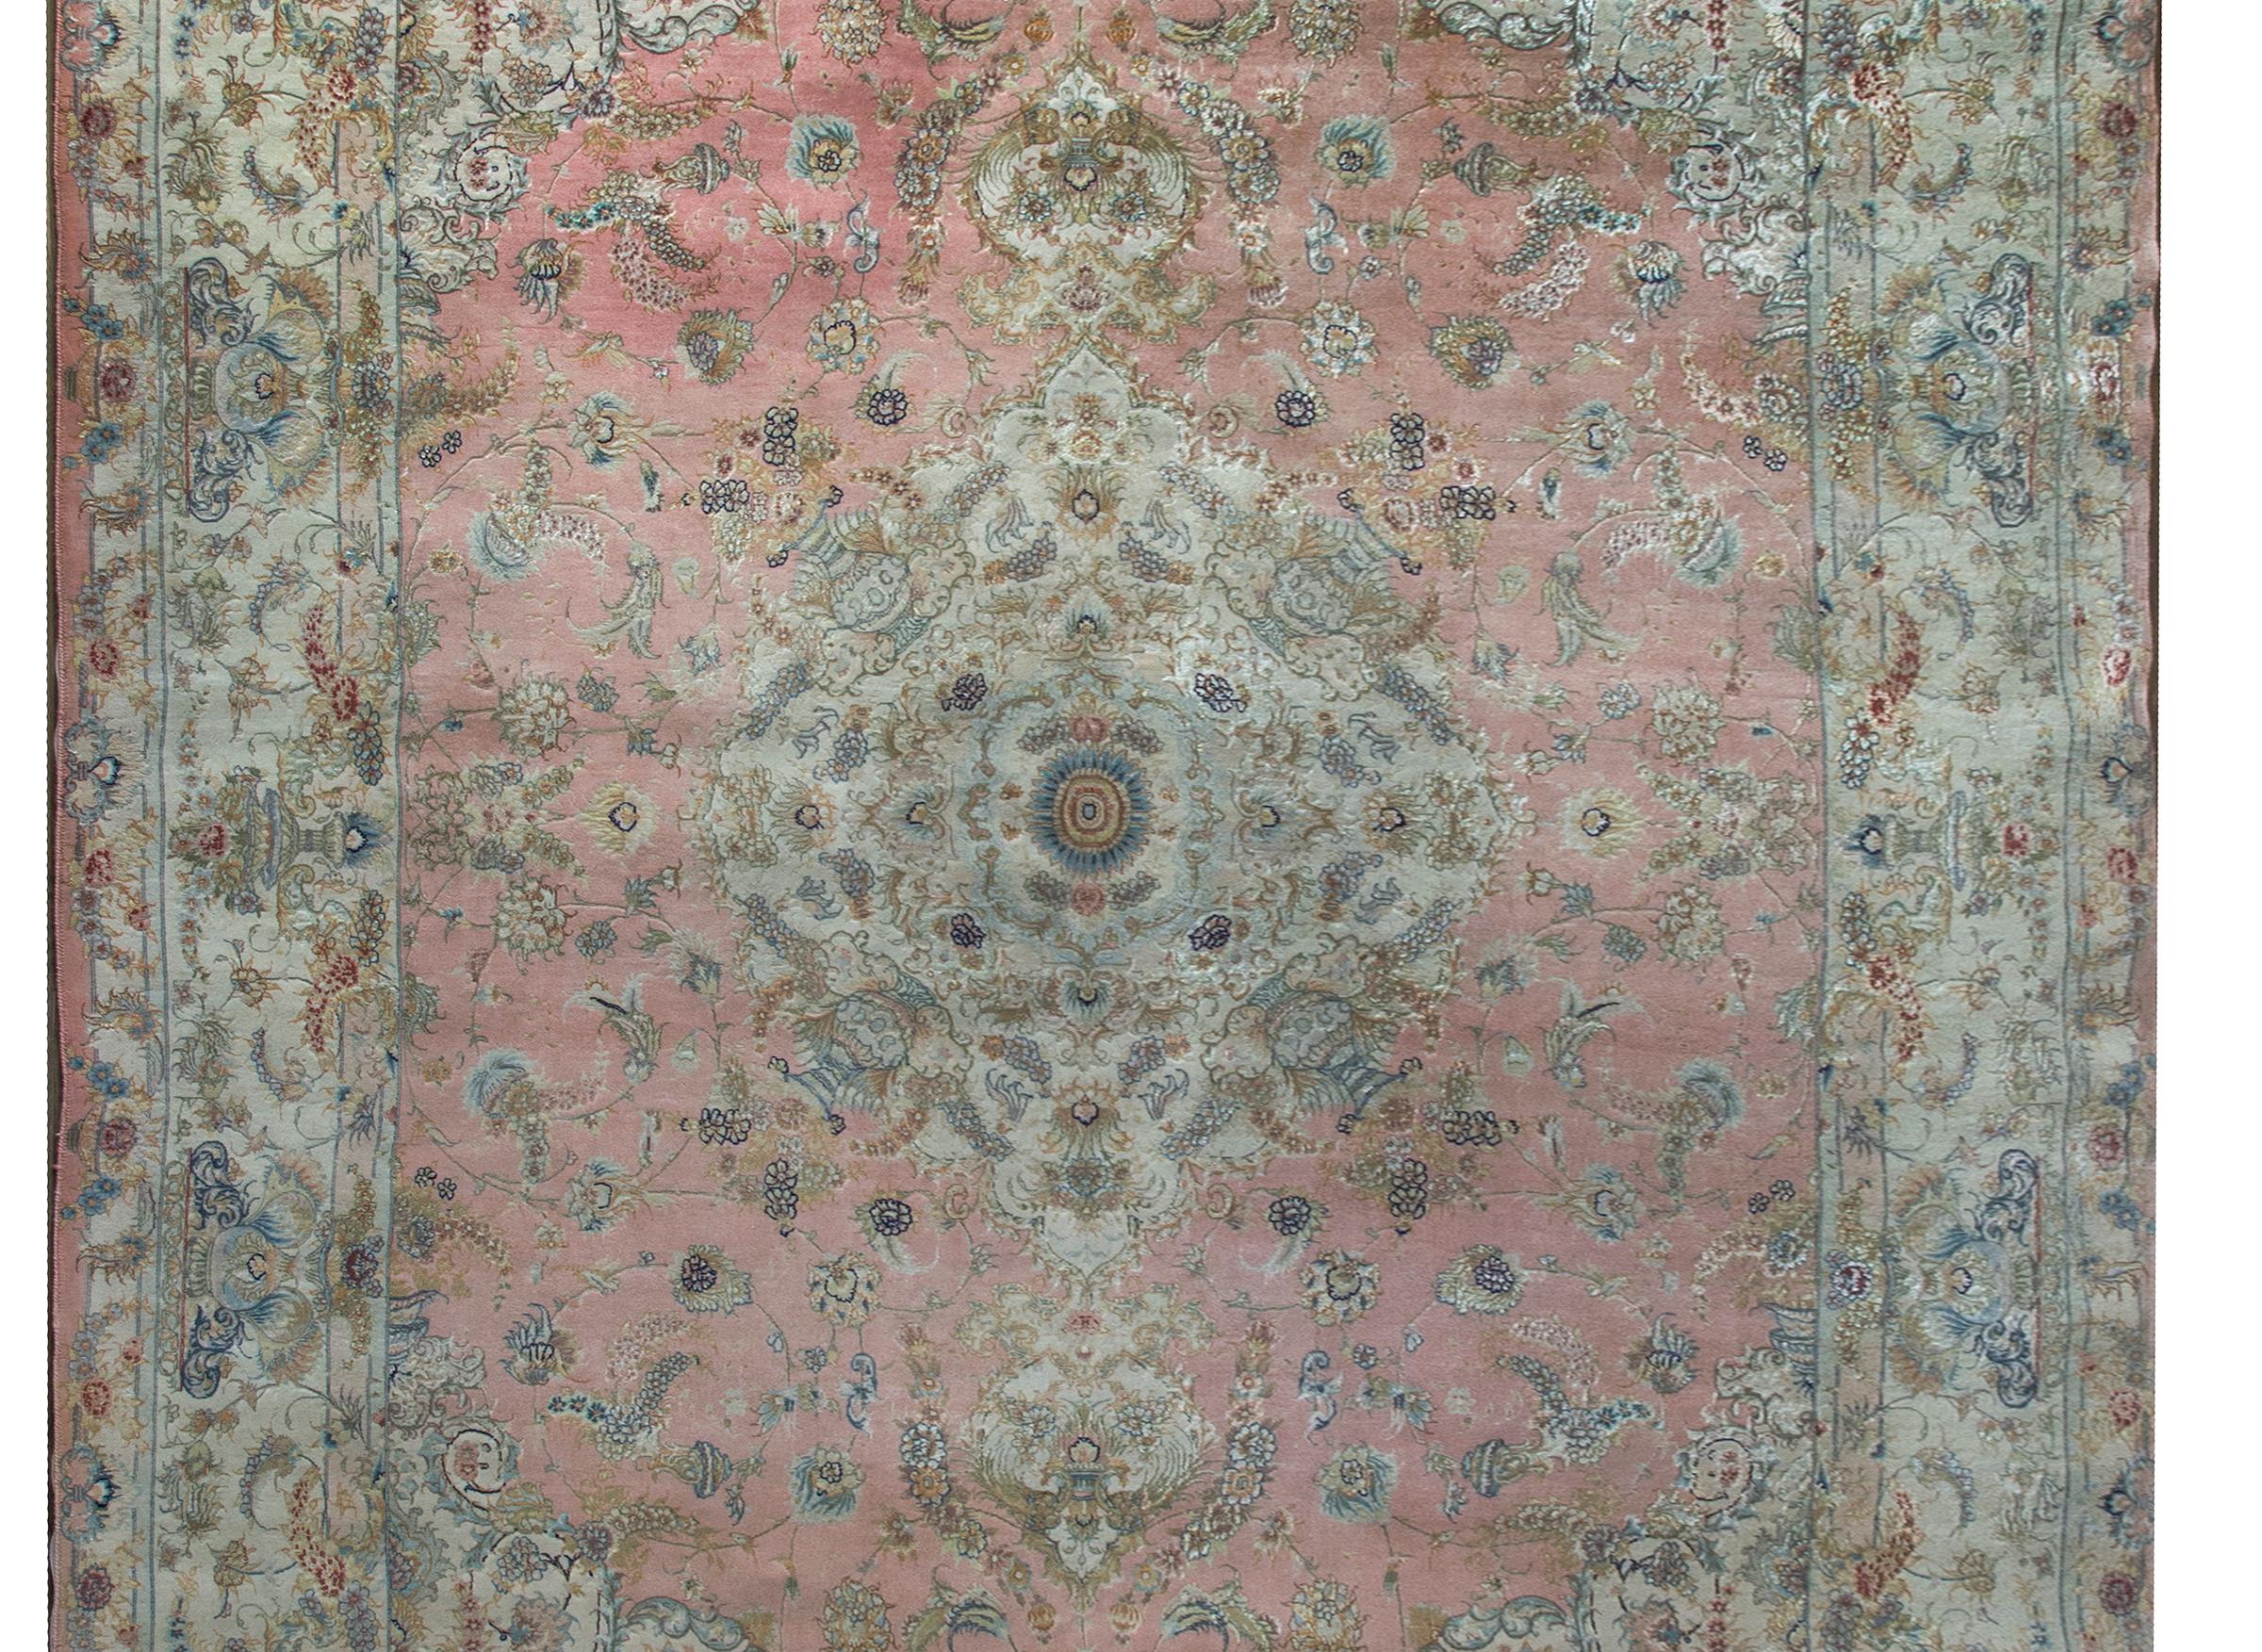 An extraordinary late 20th century Persian Tabriz rug with a large central floral medallion with myriad flowers and a vase with flowers in each corner, and living amidst a field of more flowers, and surrounded by an incredible wide repeated floral